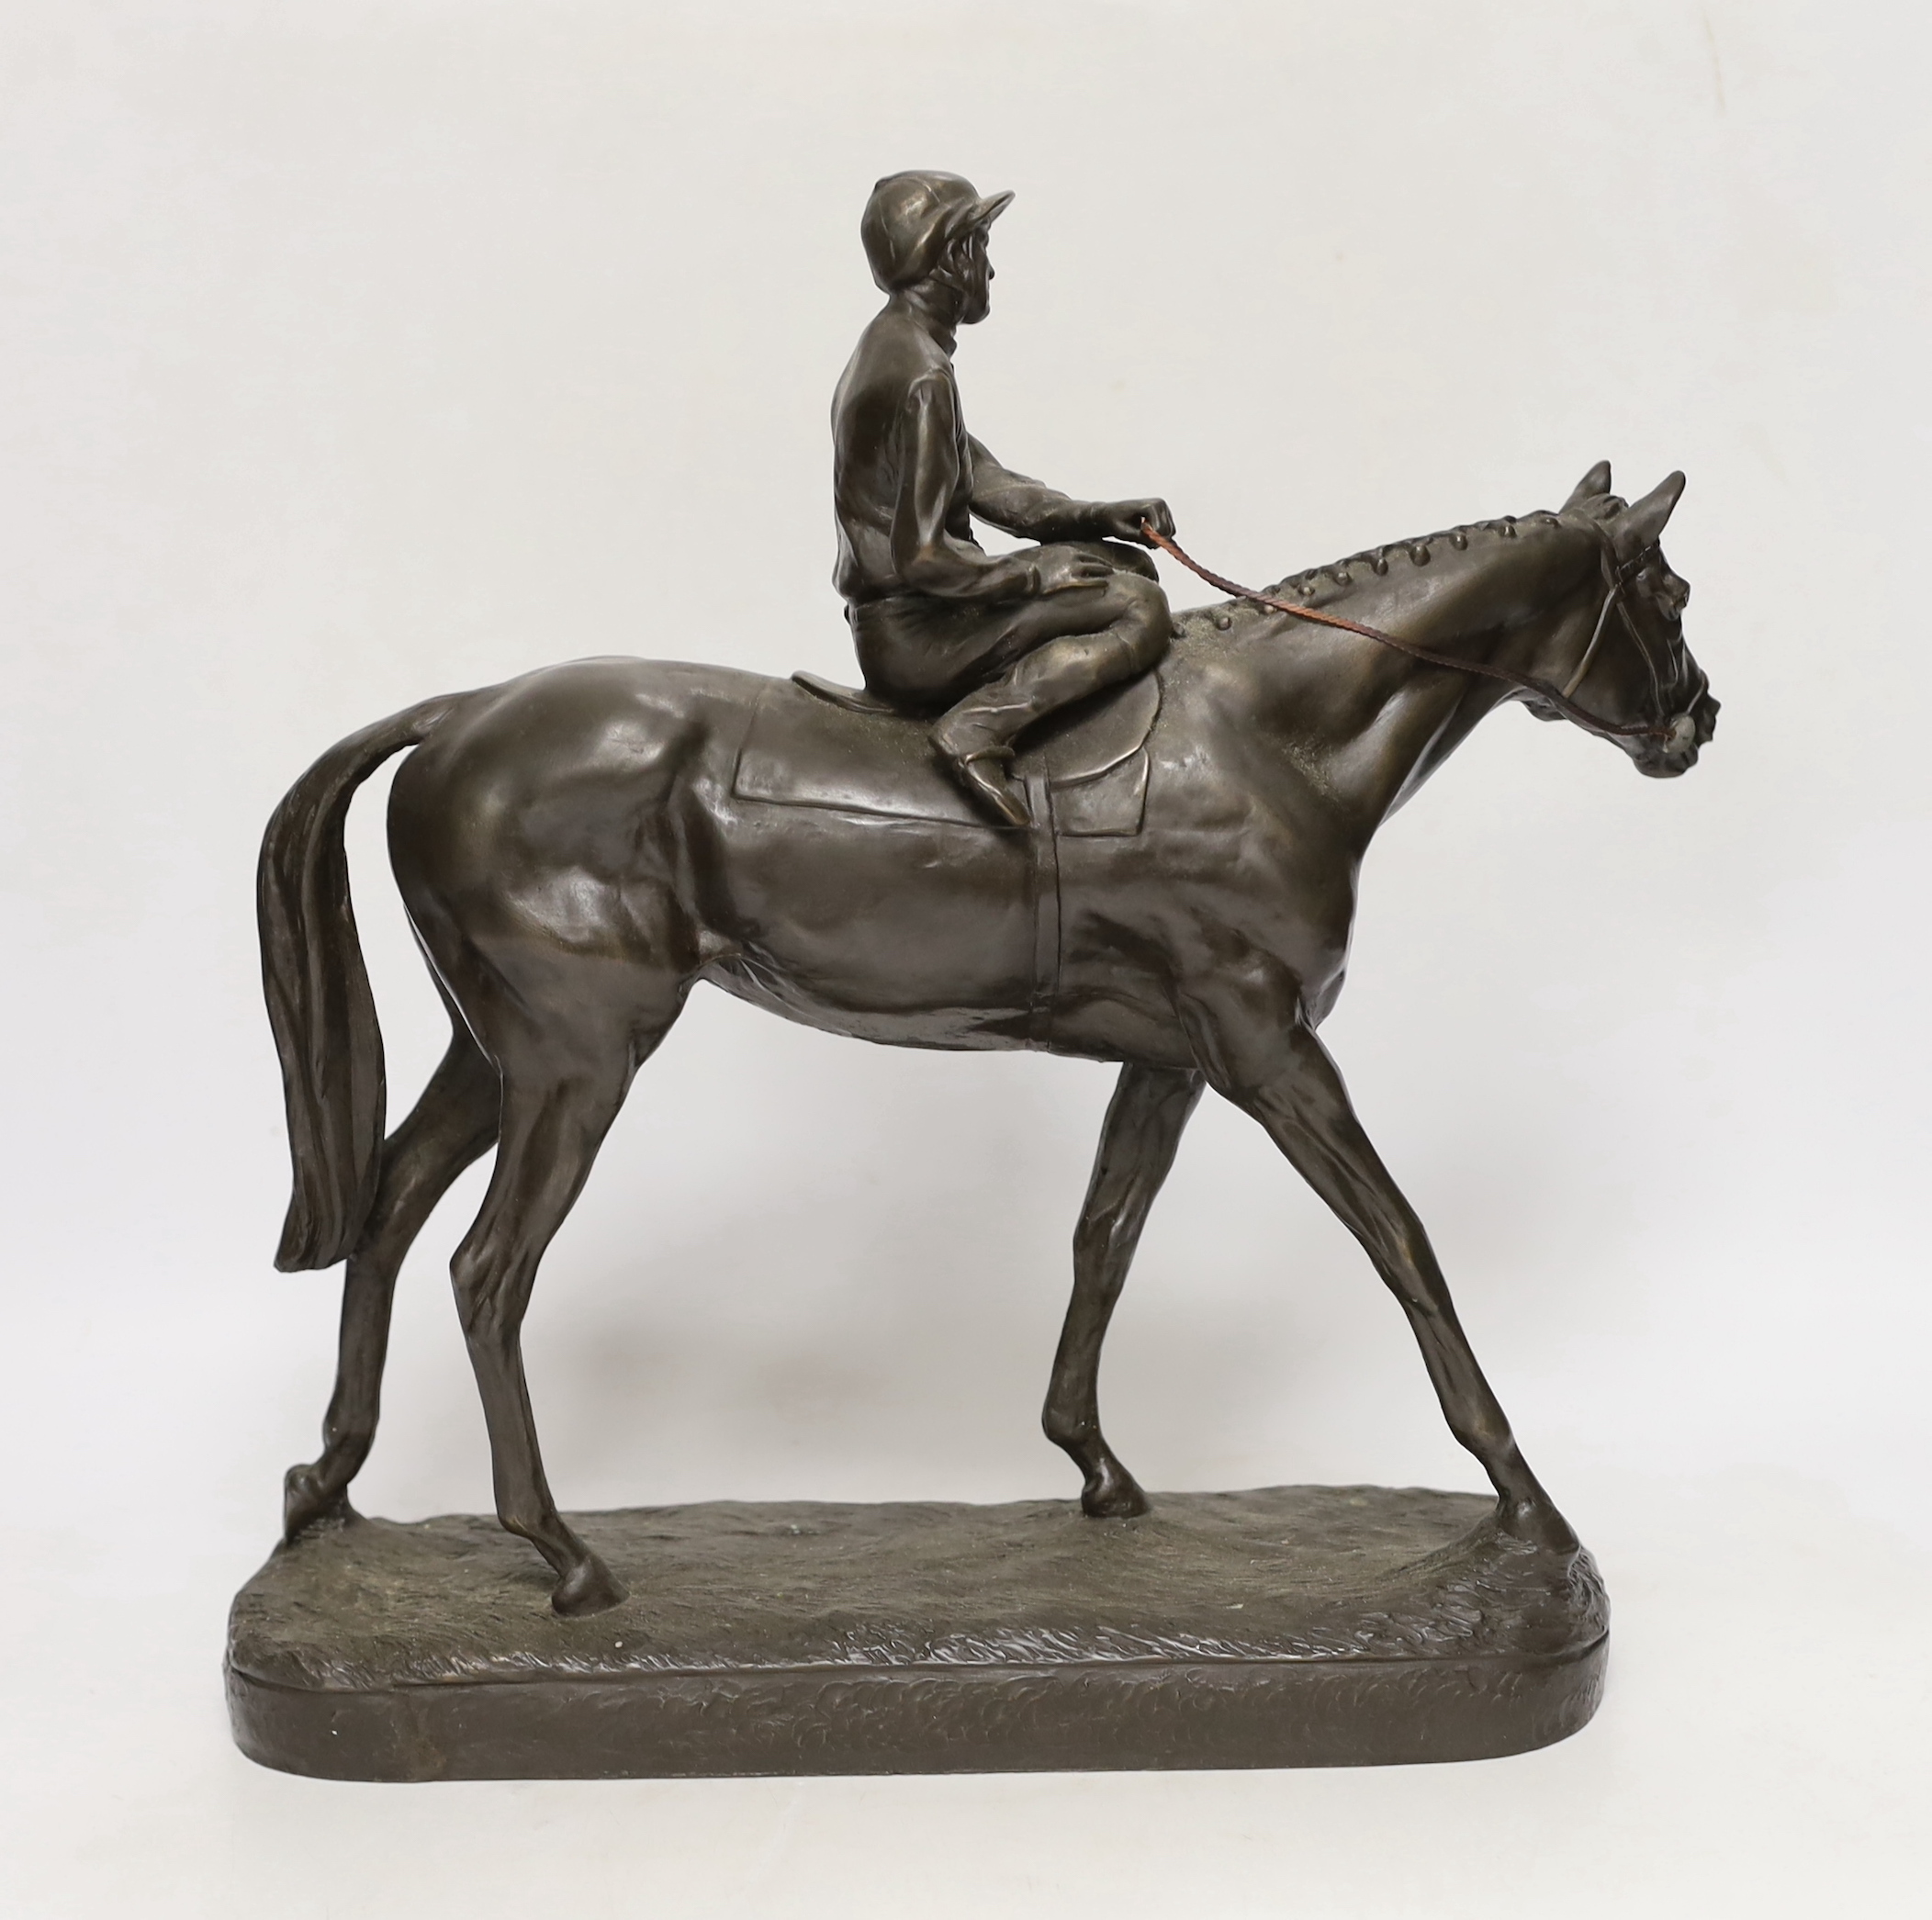 A bronzed resin racehorse and jockey figure group, 33cm high